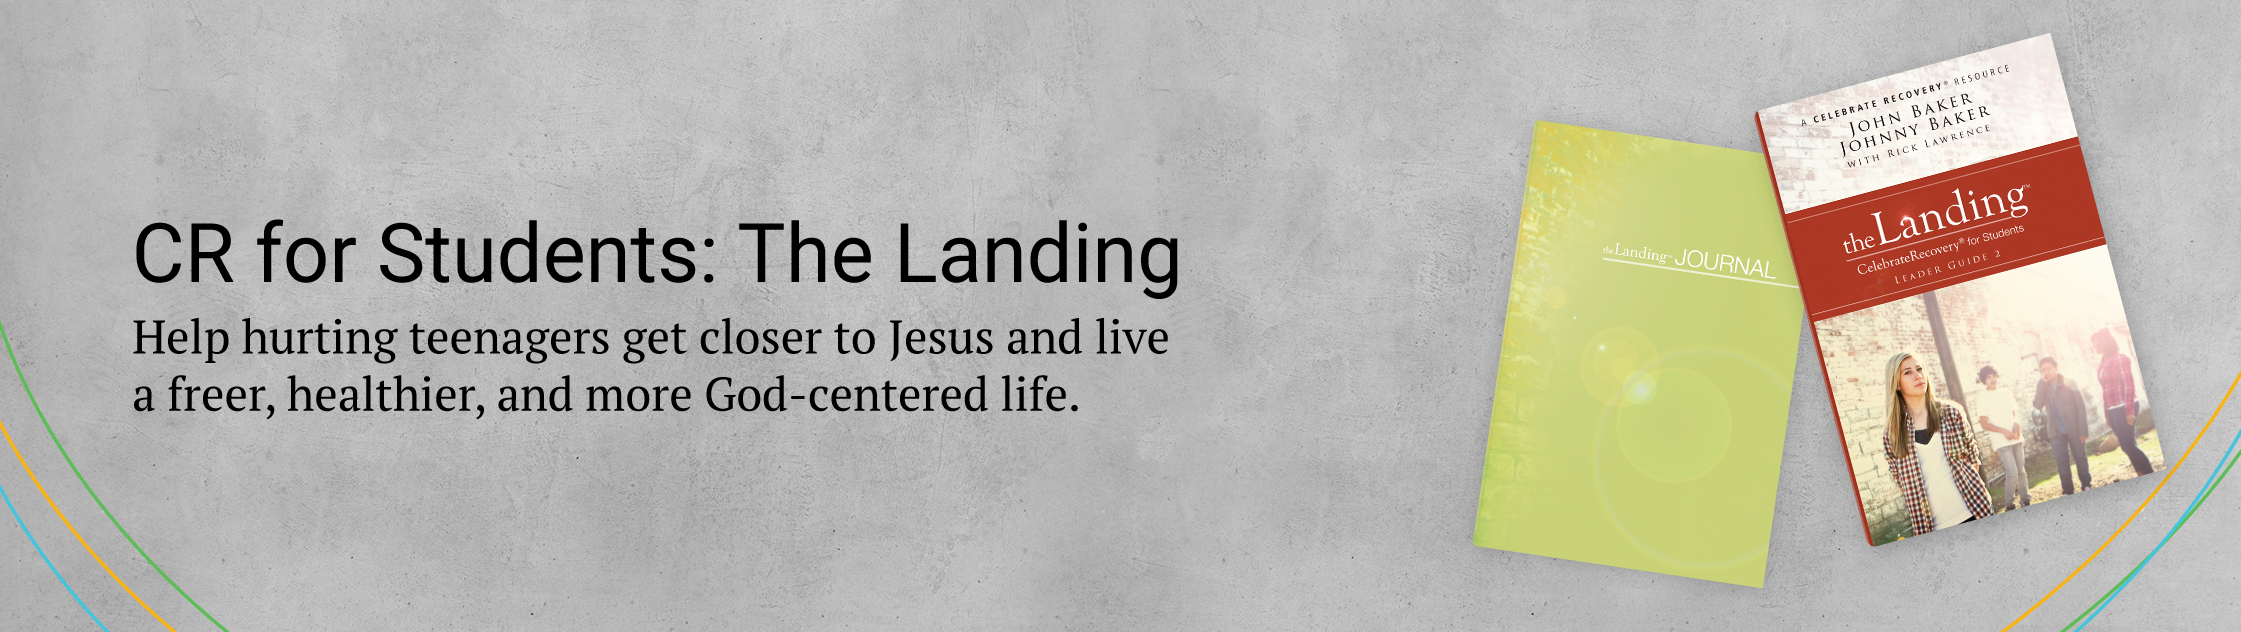 CR for Students: The Landing